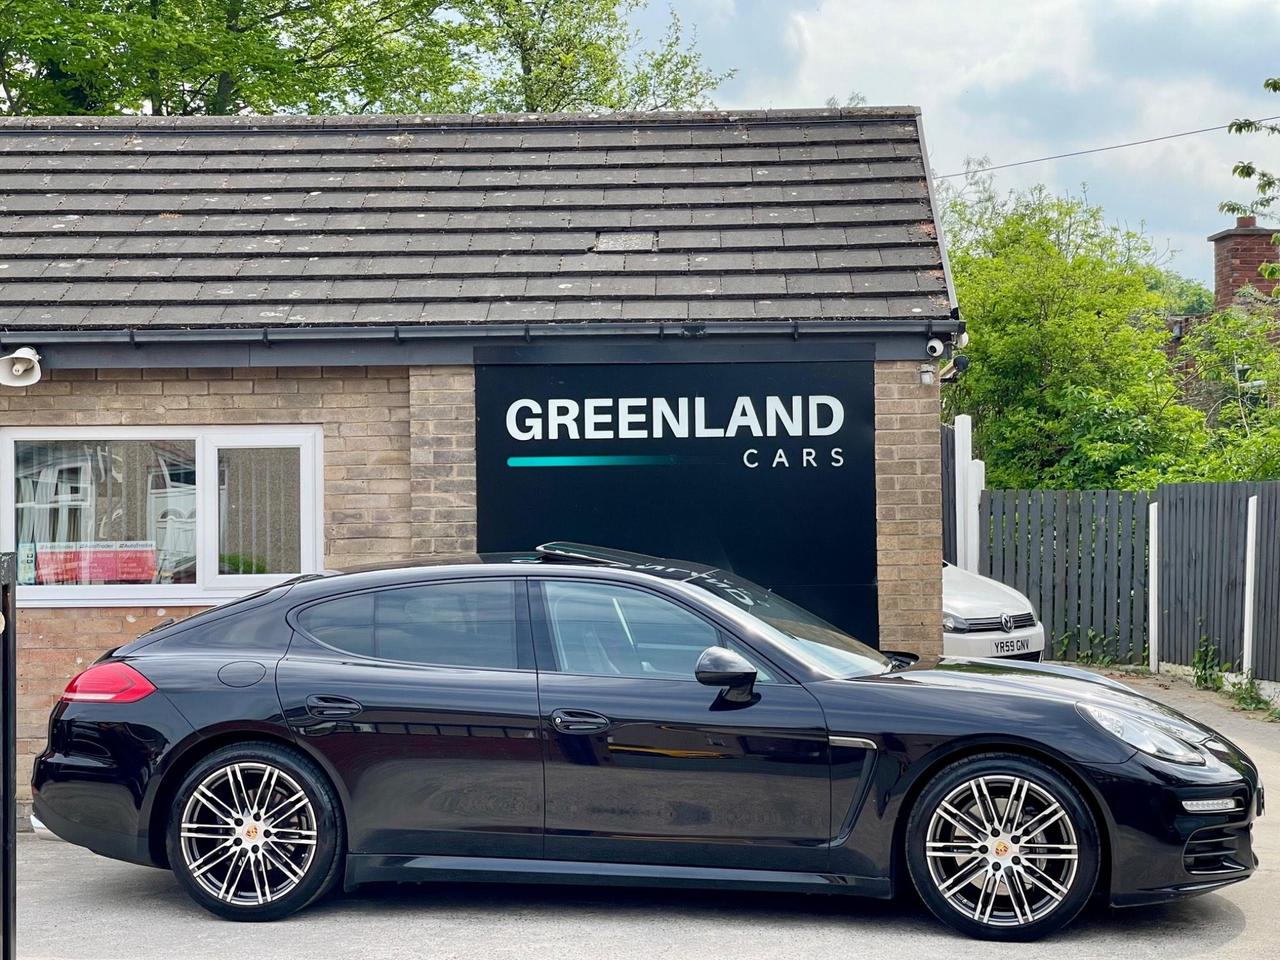 Used 2014 Porsche Panamera for sale in Sheffield